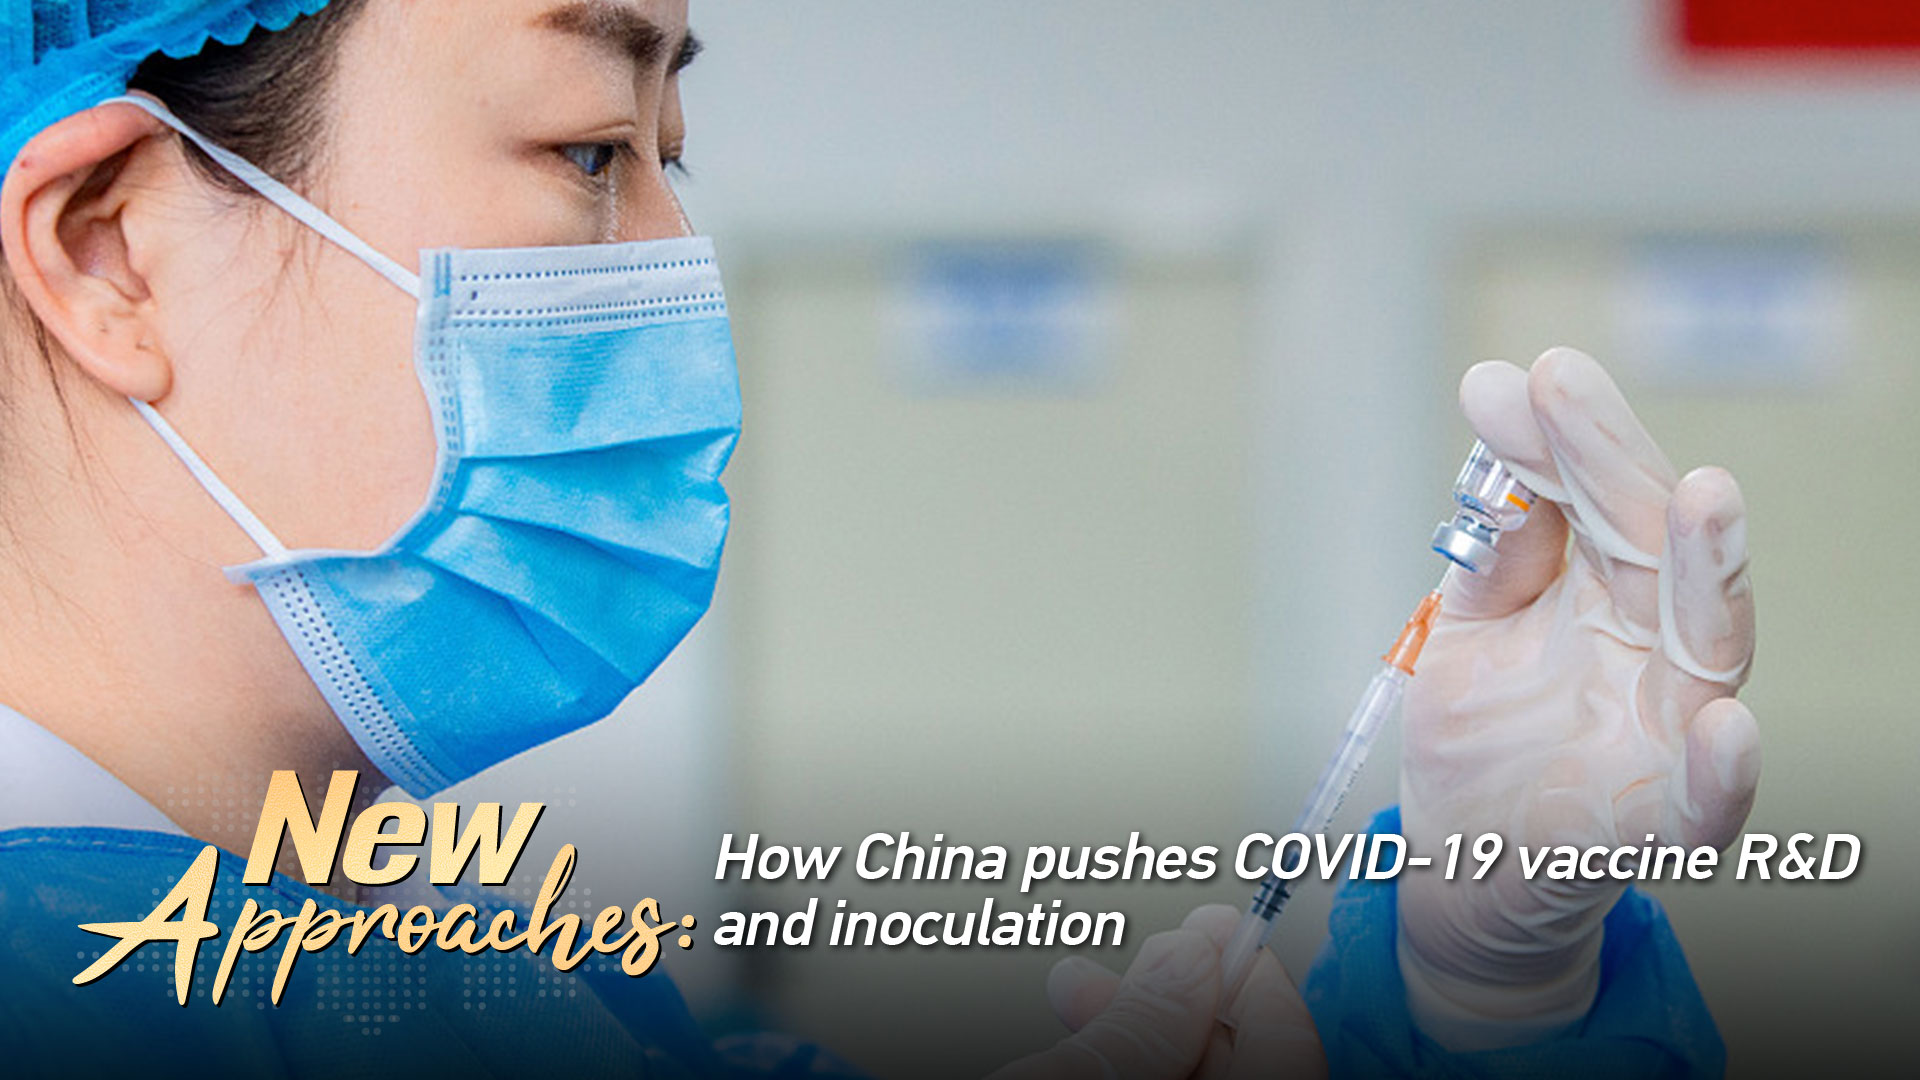 New Approaches : How China pushes COVID-19 vaccine R&D and inoculation